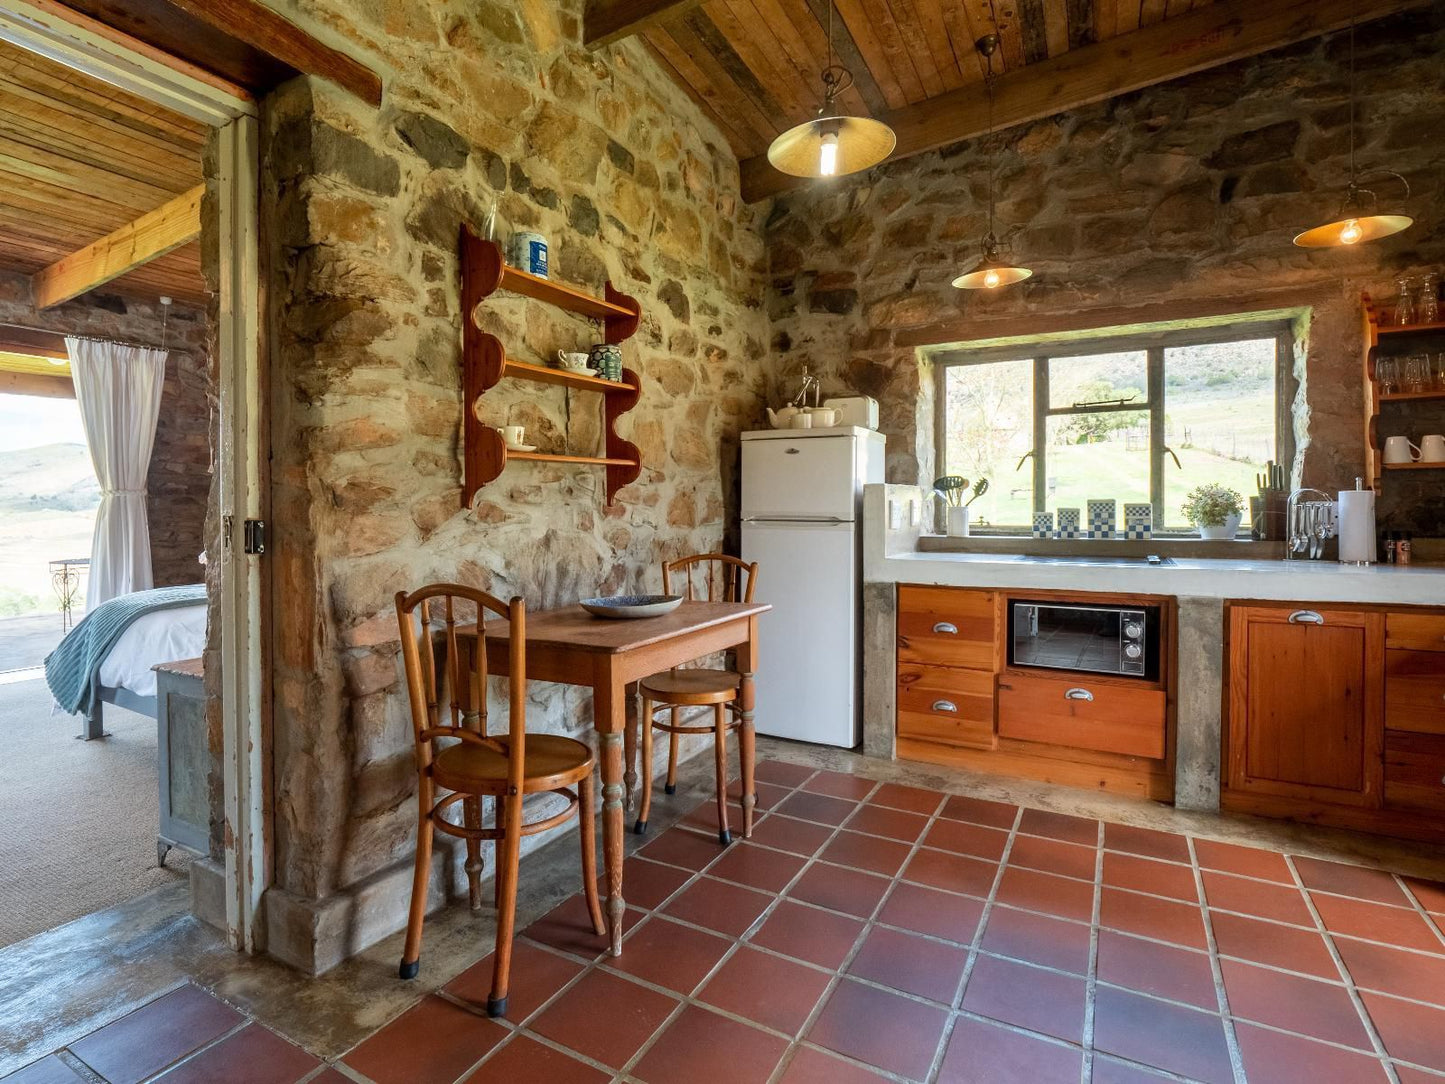 Die Beloofde Land Uniondale Western Cape South Africa Cabin, Building, Architecture, Kitchen